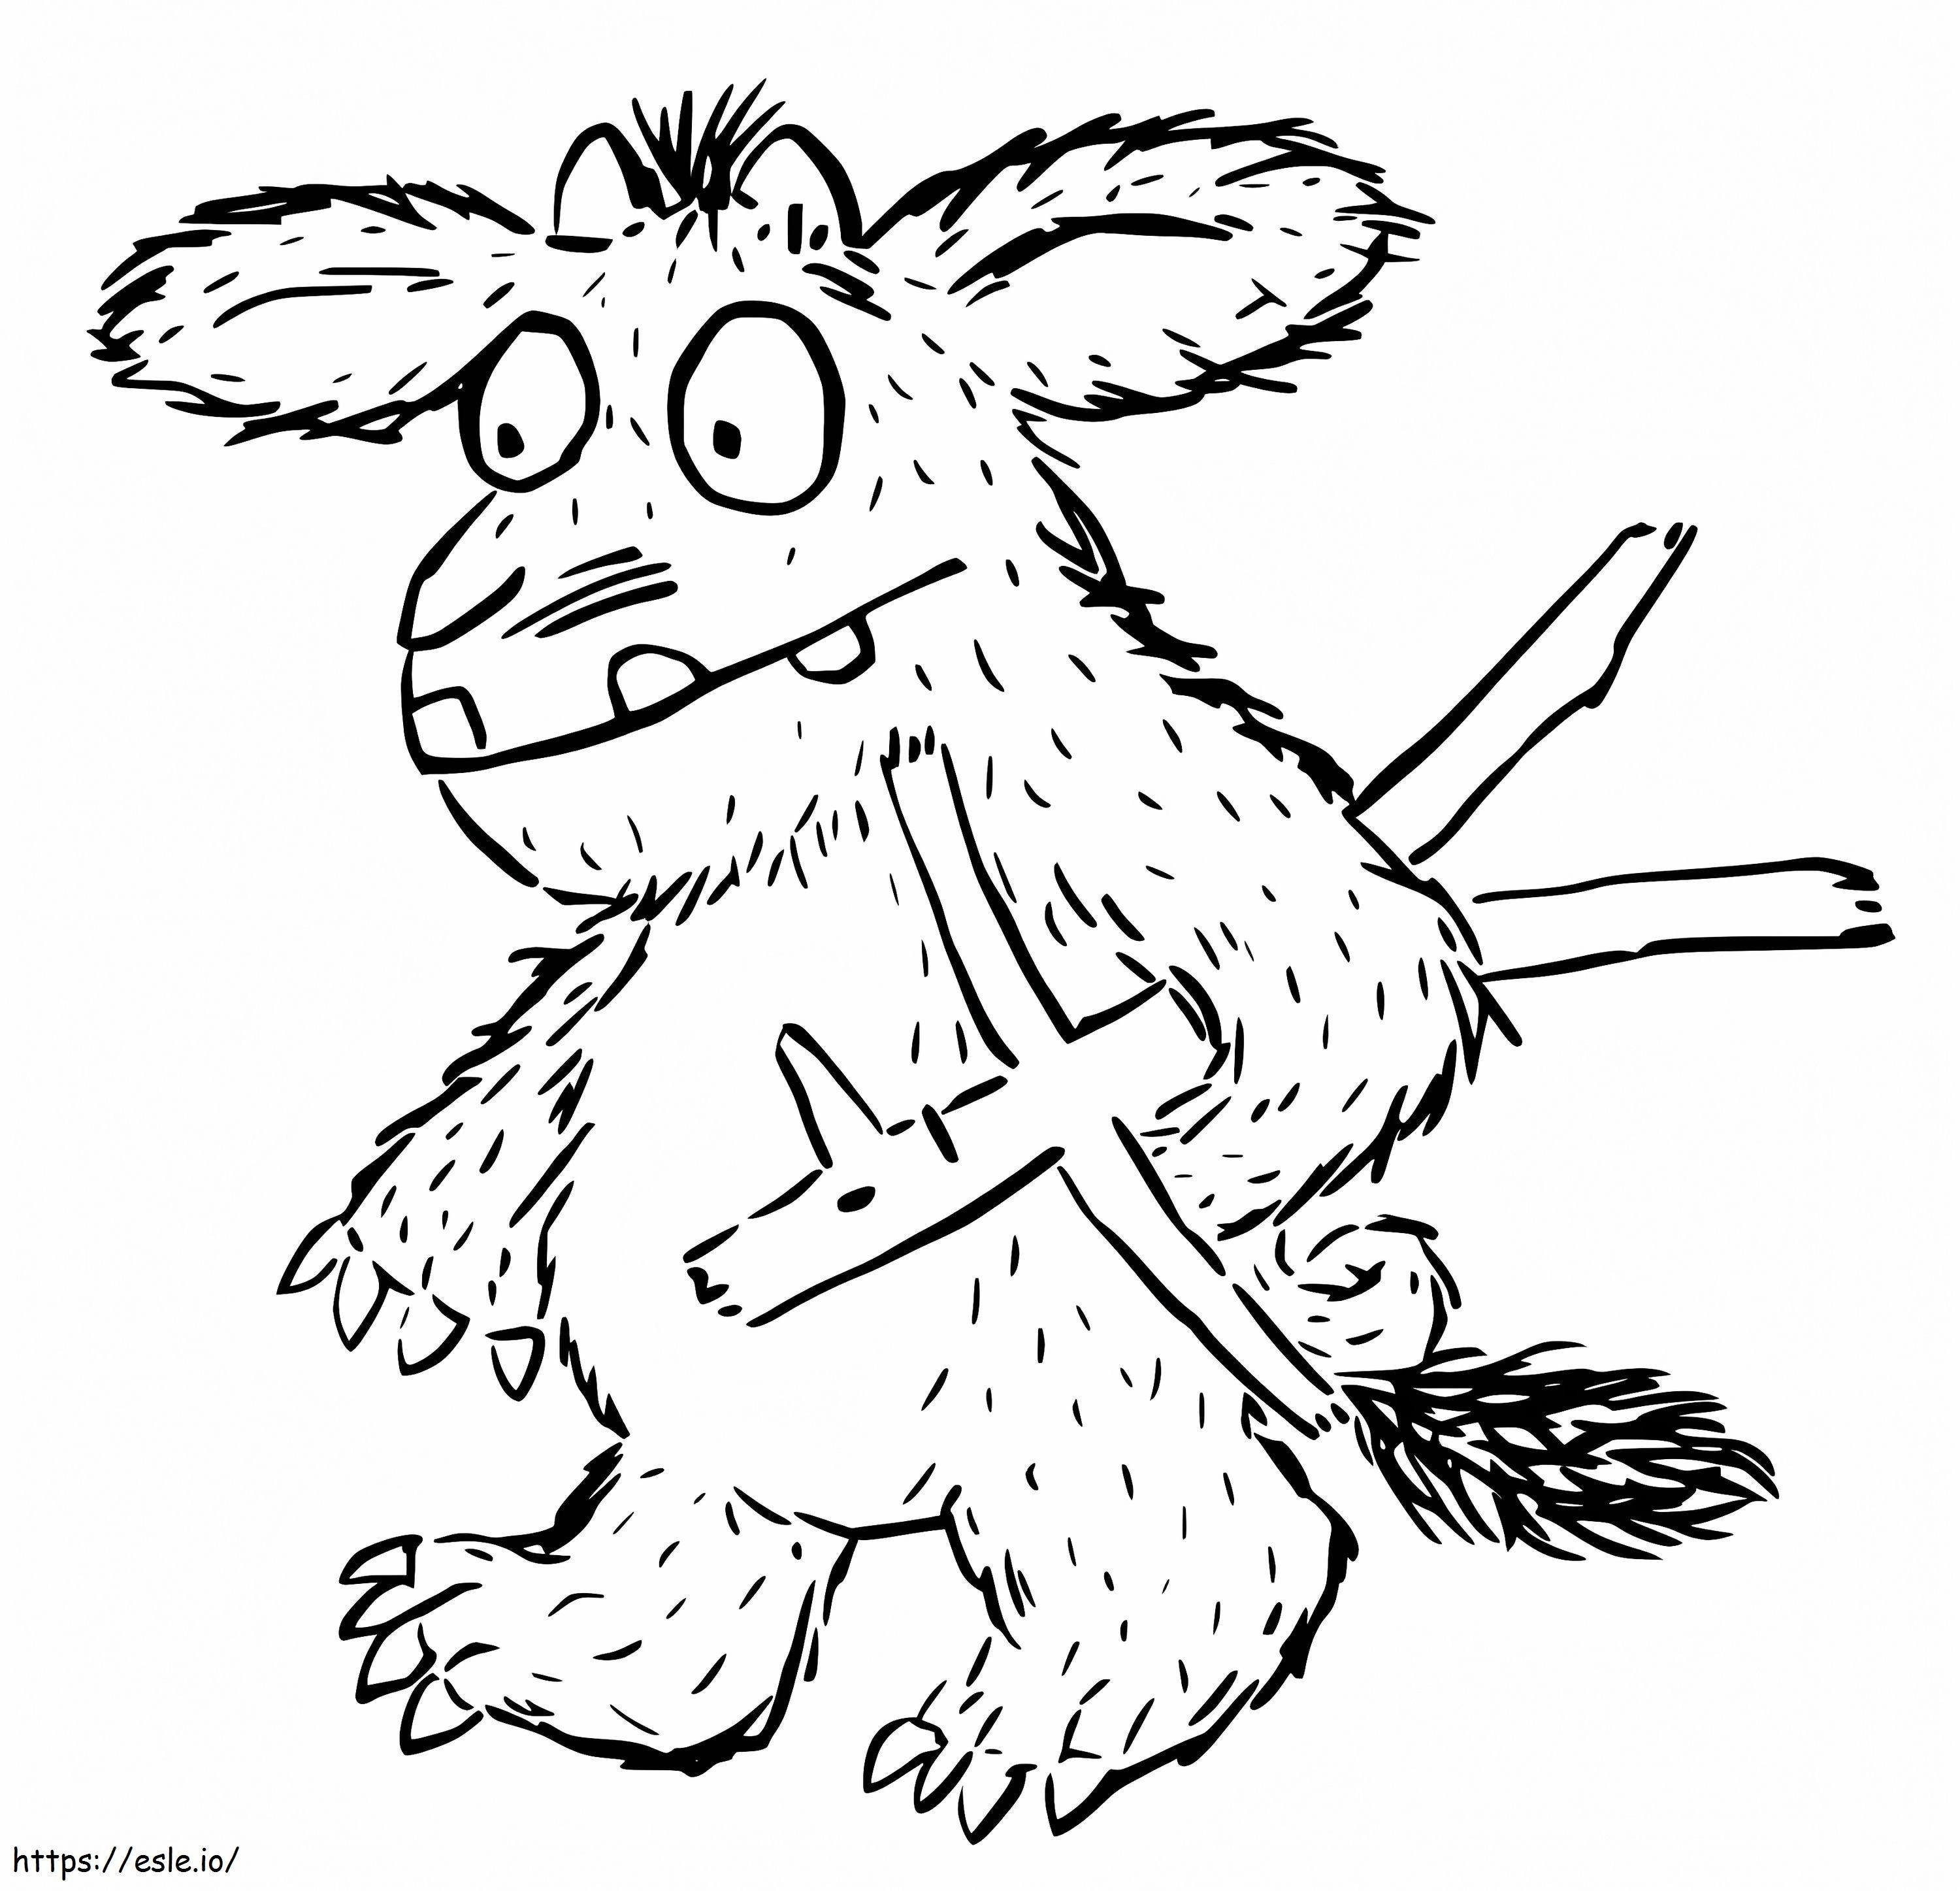 Little Gruffalo coloring page